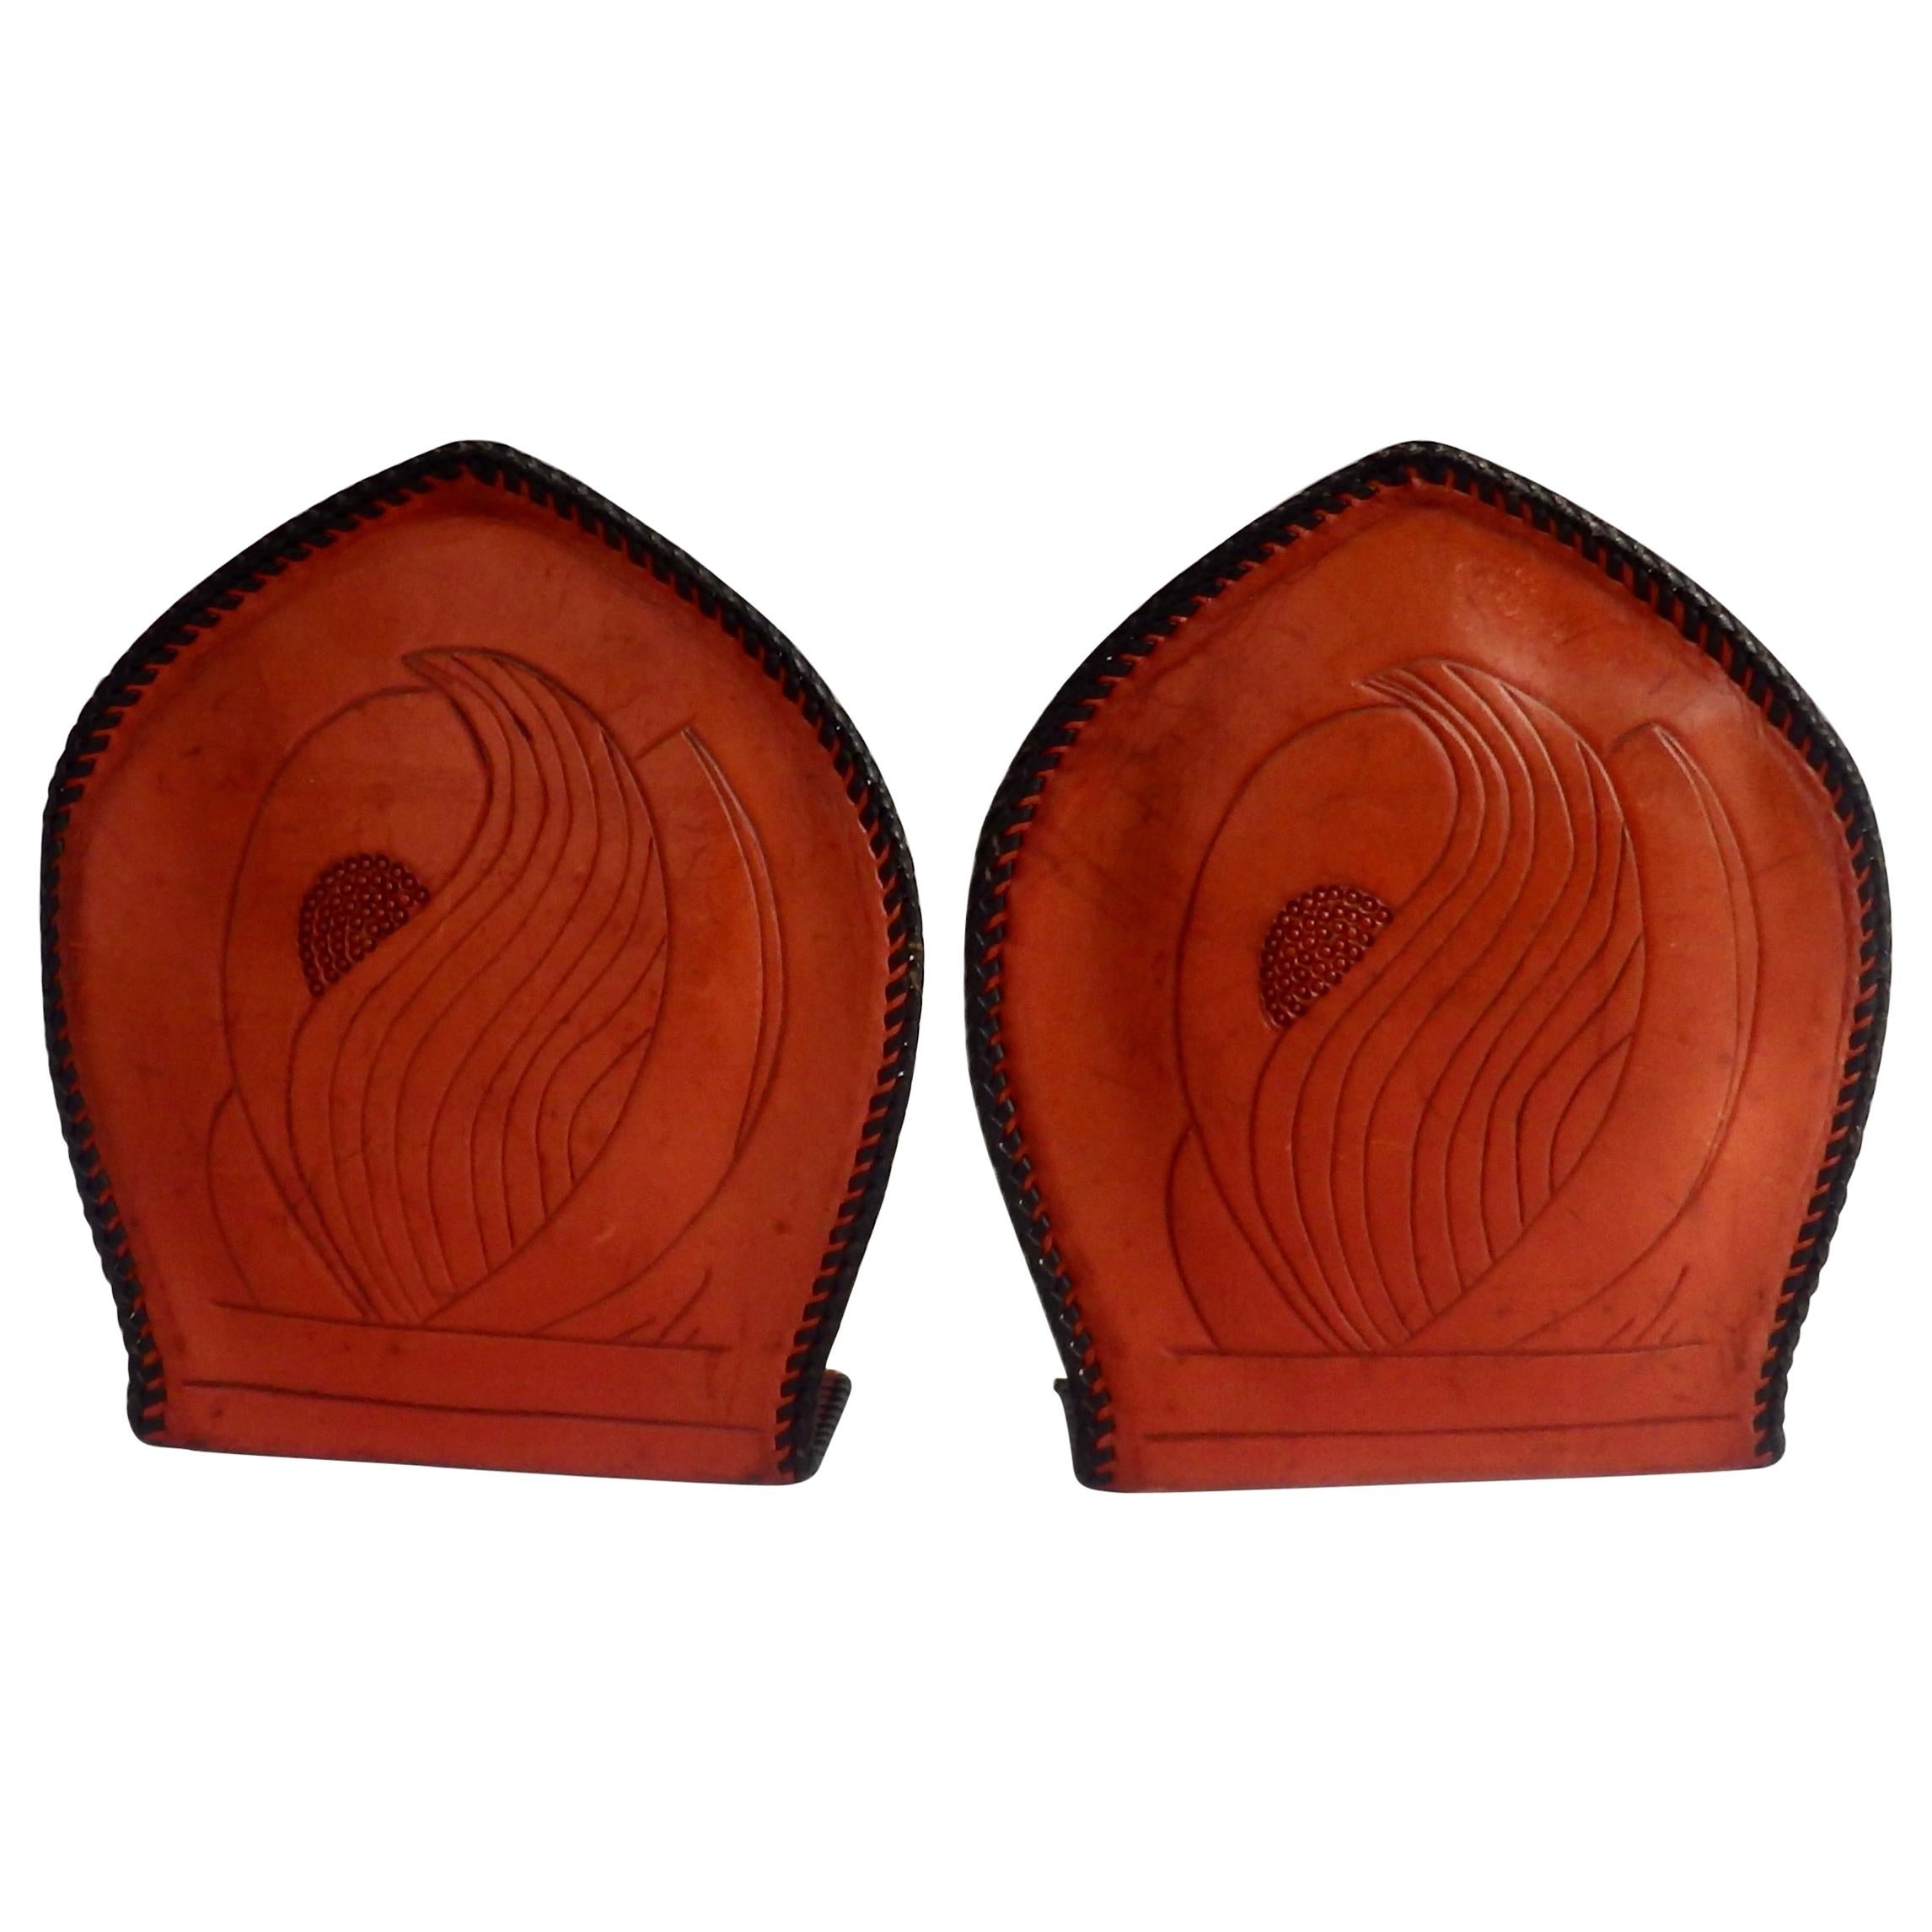 Pair of Hand Tooled Leather Book Ends with Laced Edges